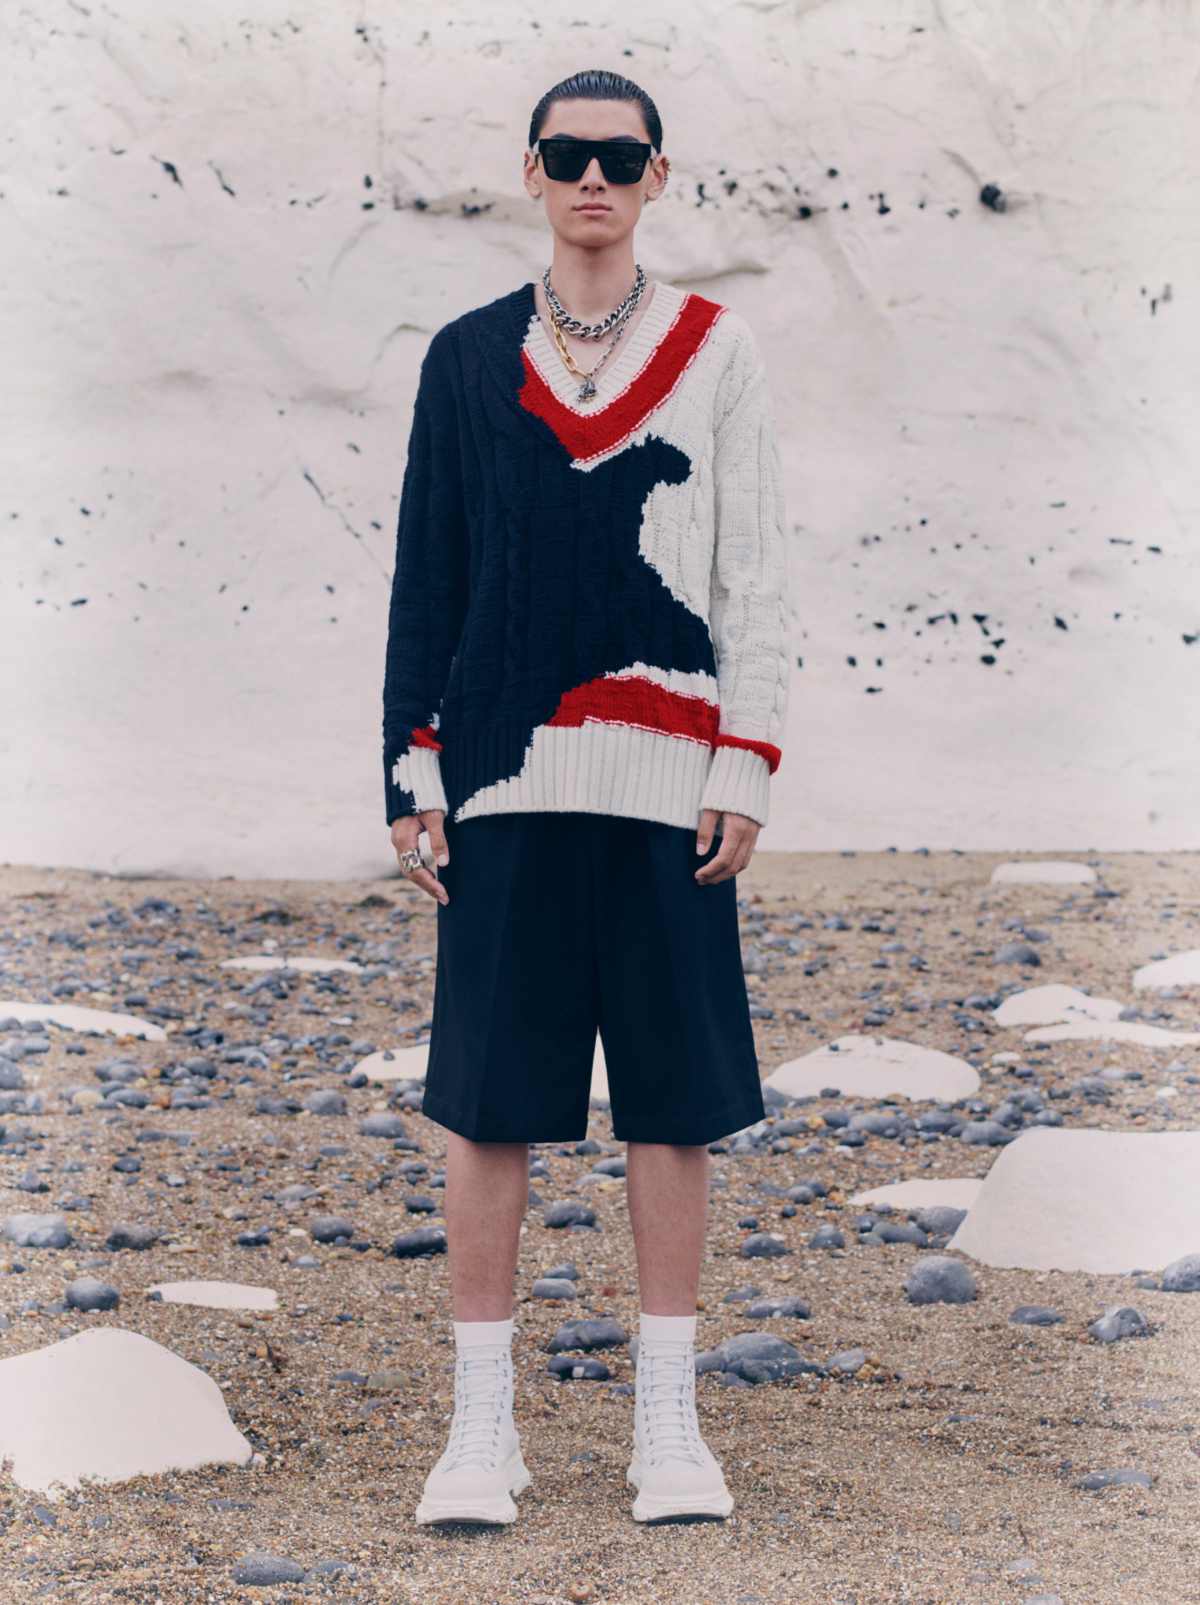 Alexander McQueen Presents New Ideas With Its Hybrid Knitwear